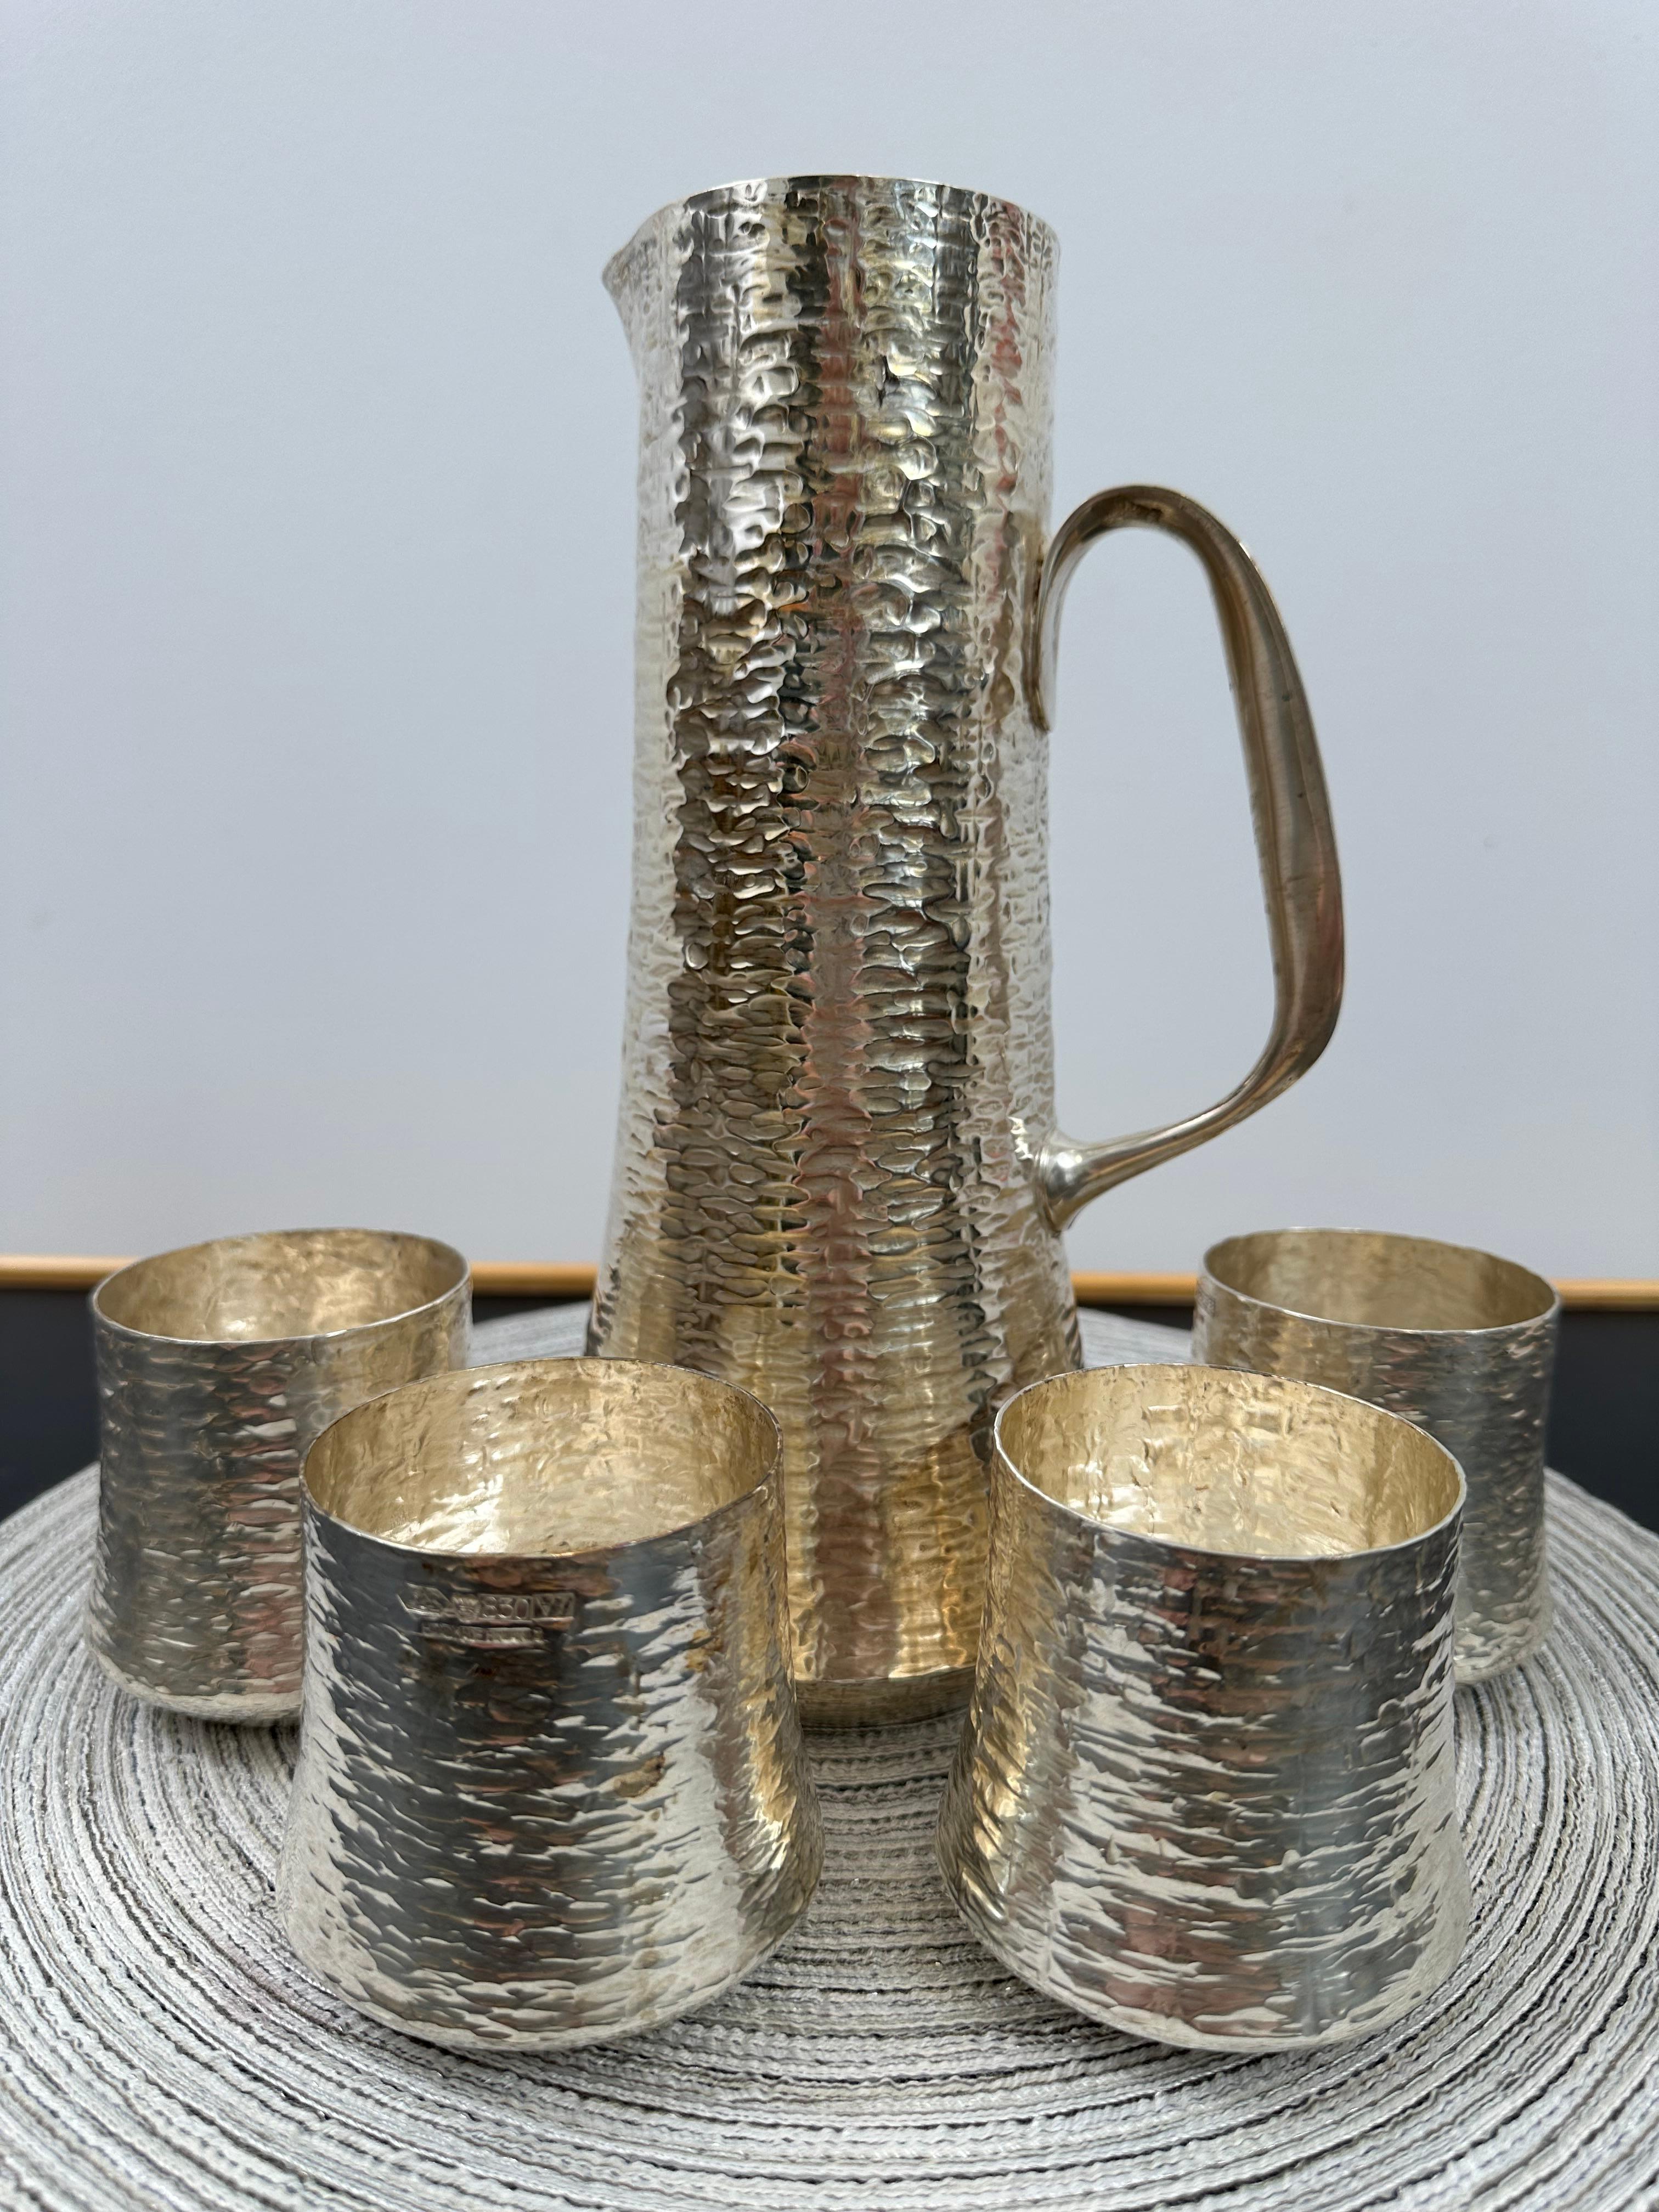 Silver pitcher, designed by Tapio Wirkkala, manufactured by Kultakeskus Oy, 1970s. Hand hammered silver. Marked and signed. Good vintage condition, minor patina and wear consistent with age and use.